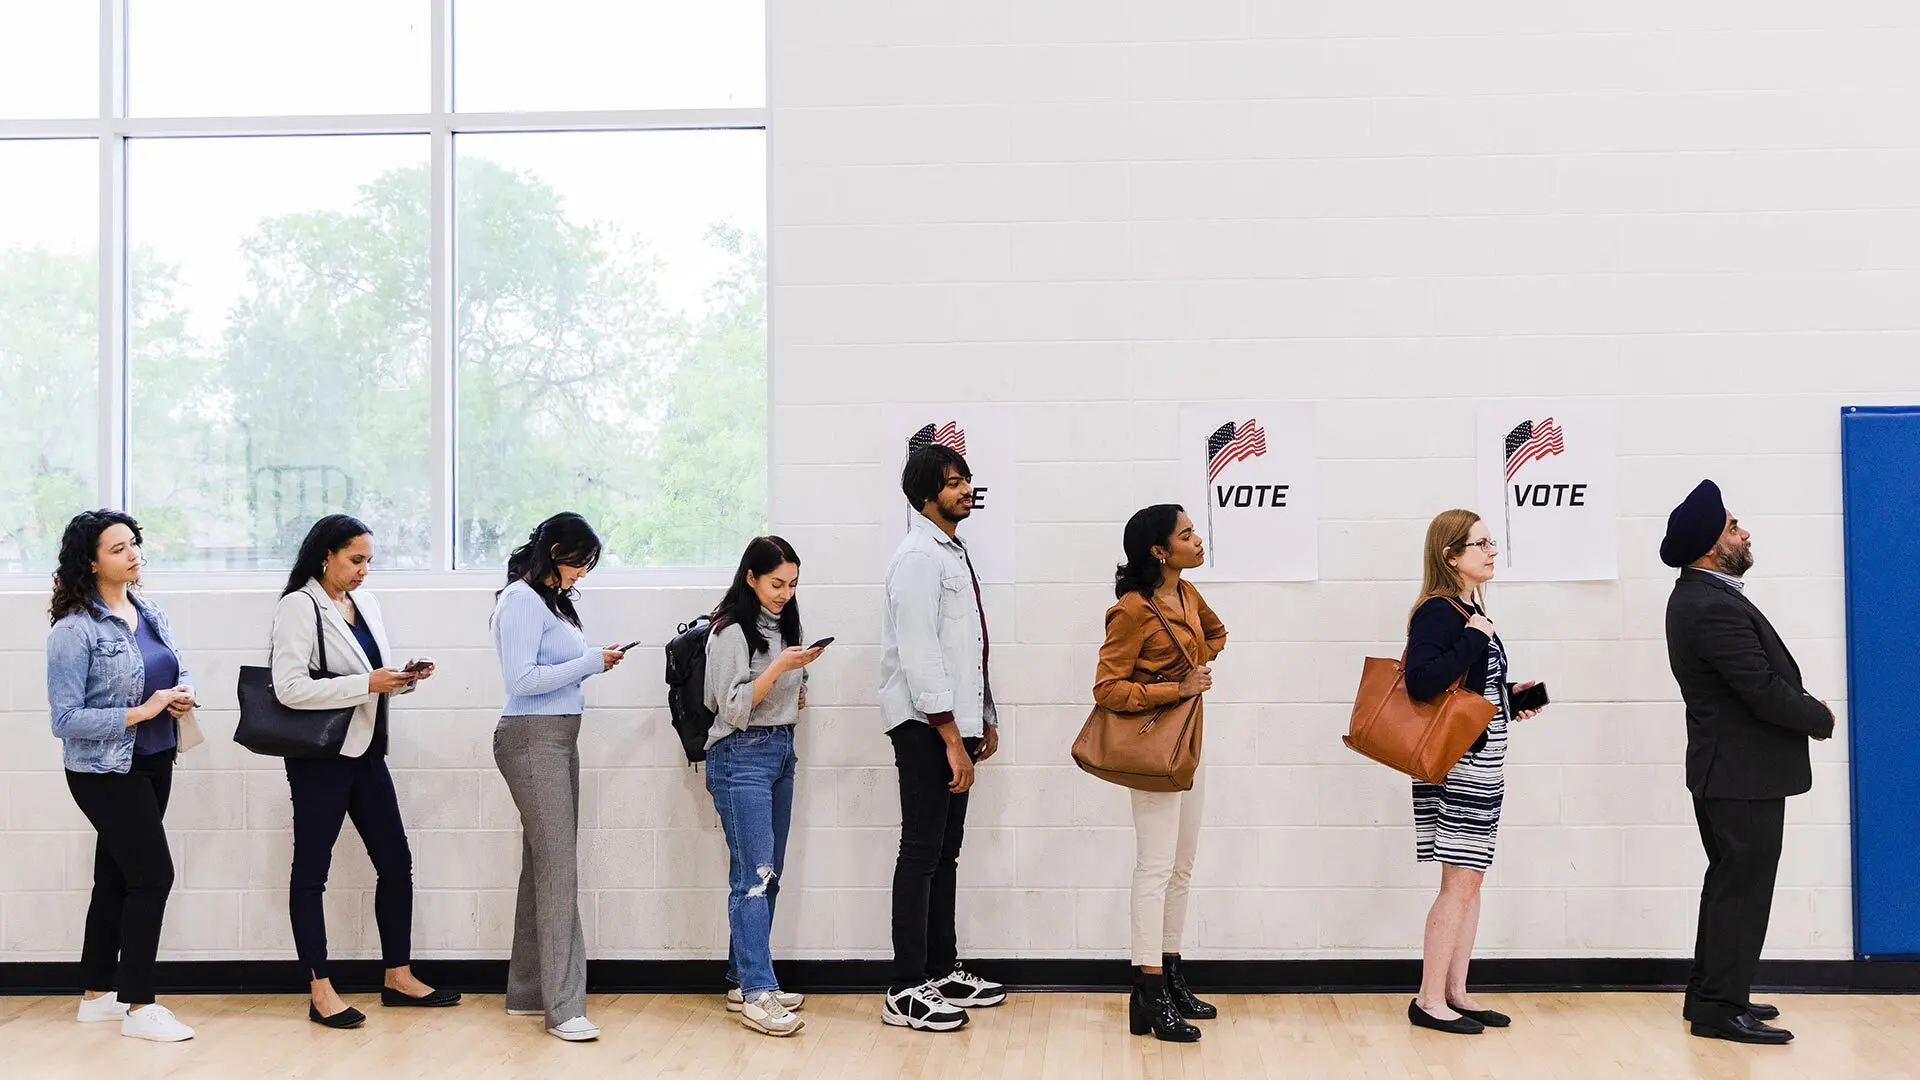 Tens of of millions of voters of all parties could face issues with accessing the ballot box this fall because of the rising use of voter ID laws, UMD researchers say.